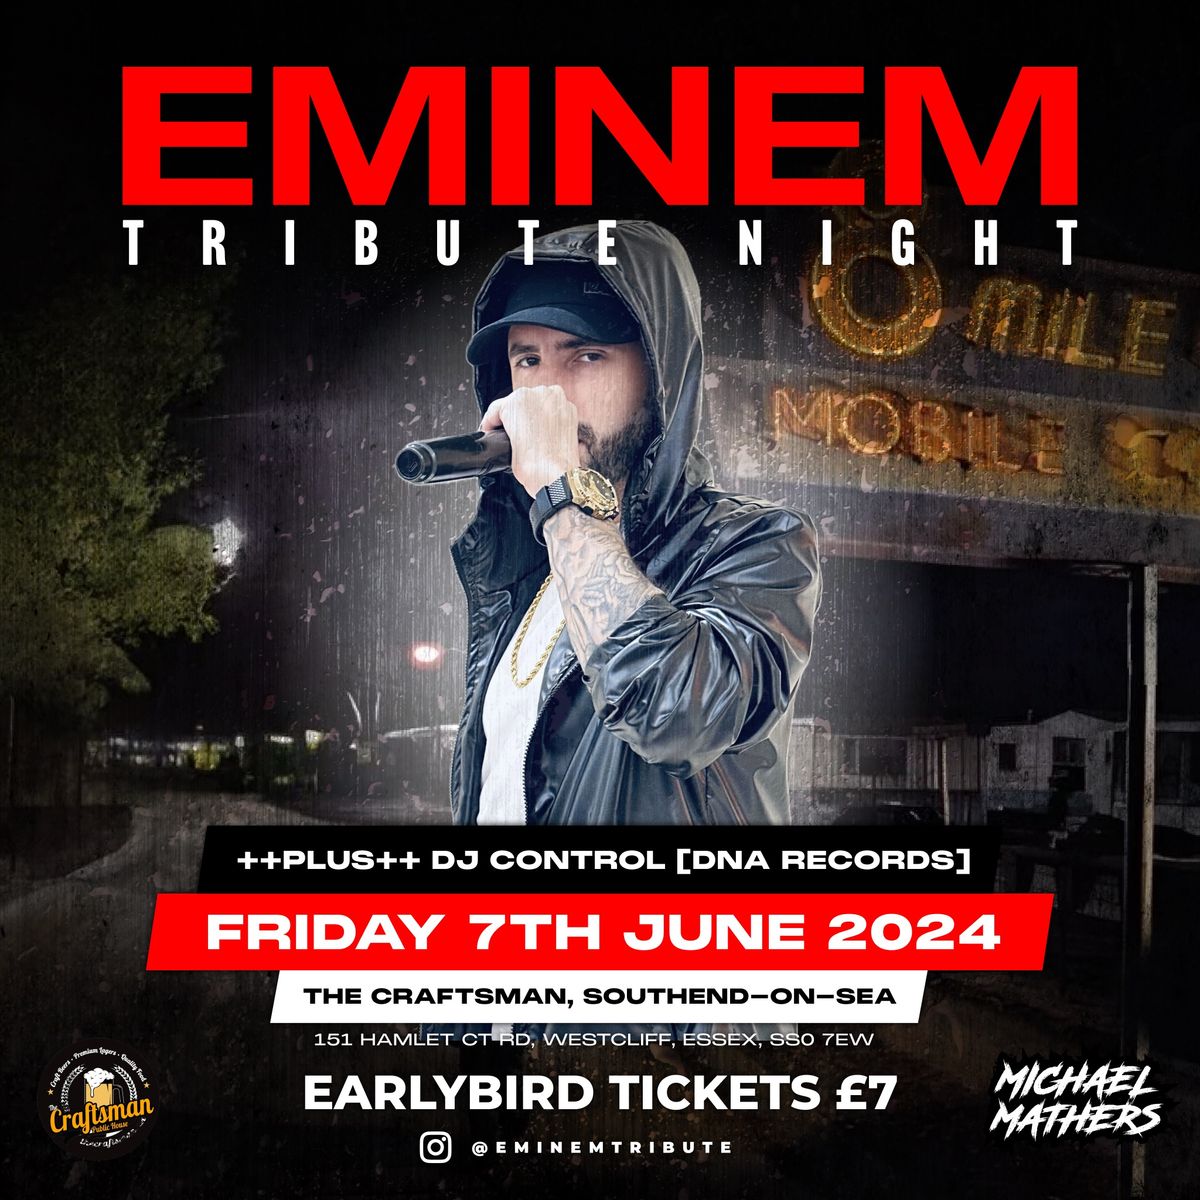 Eminem Tribute Night with Michael Mathers & DJ Control (DNA Records)